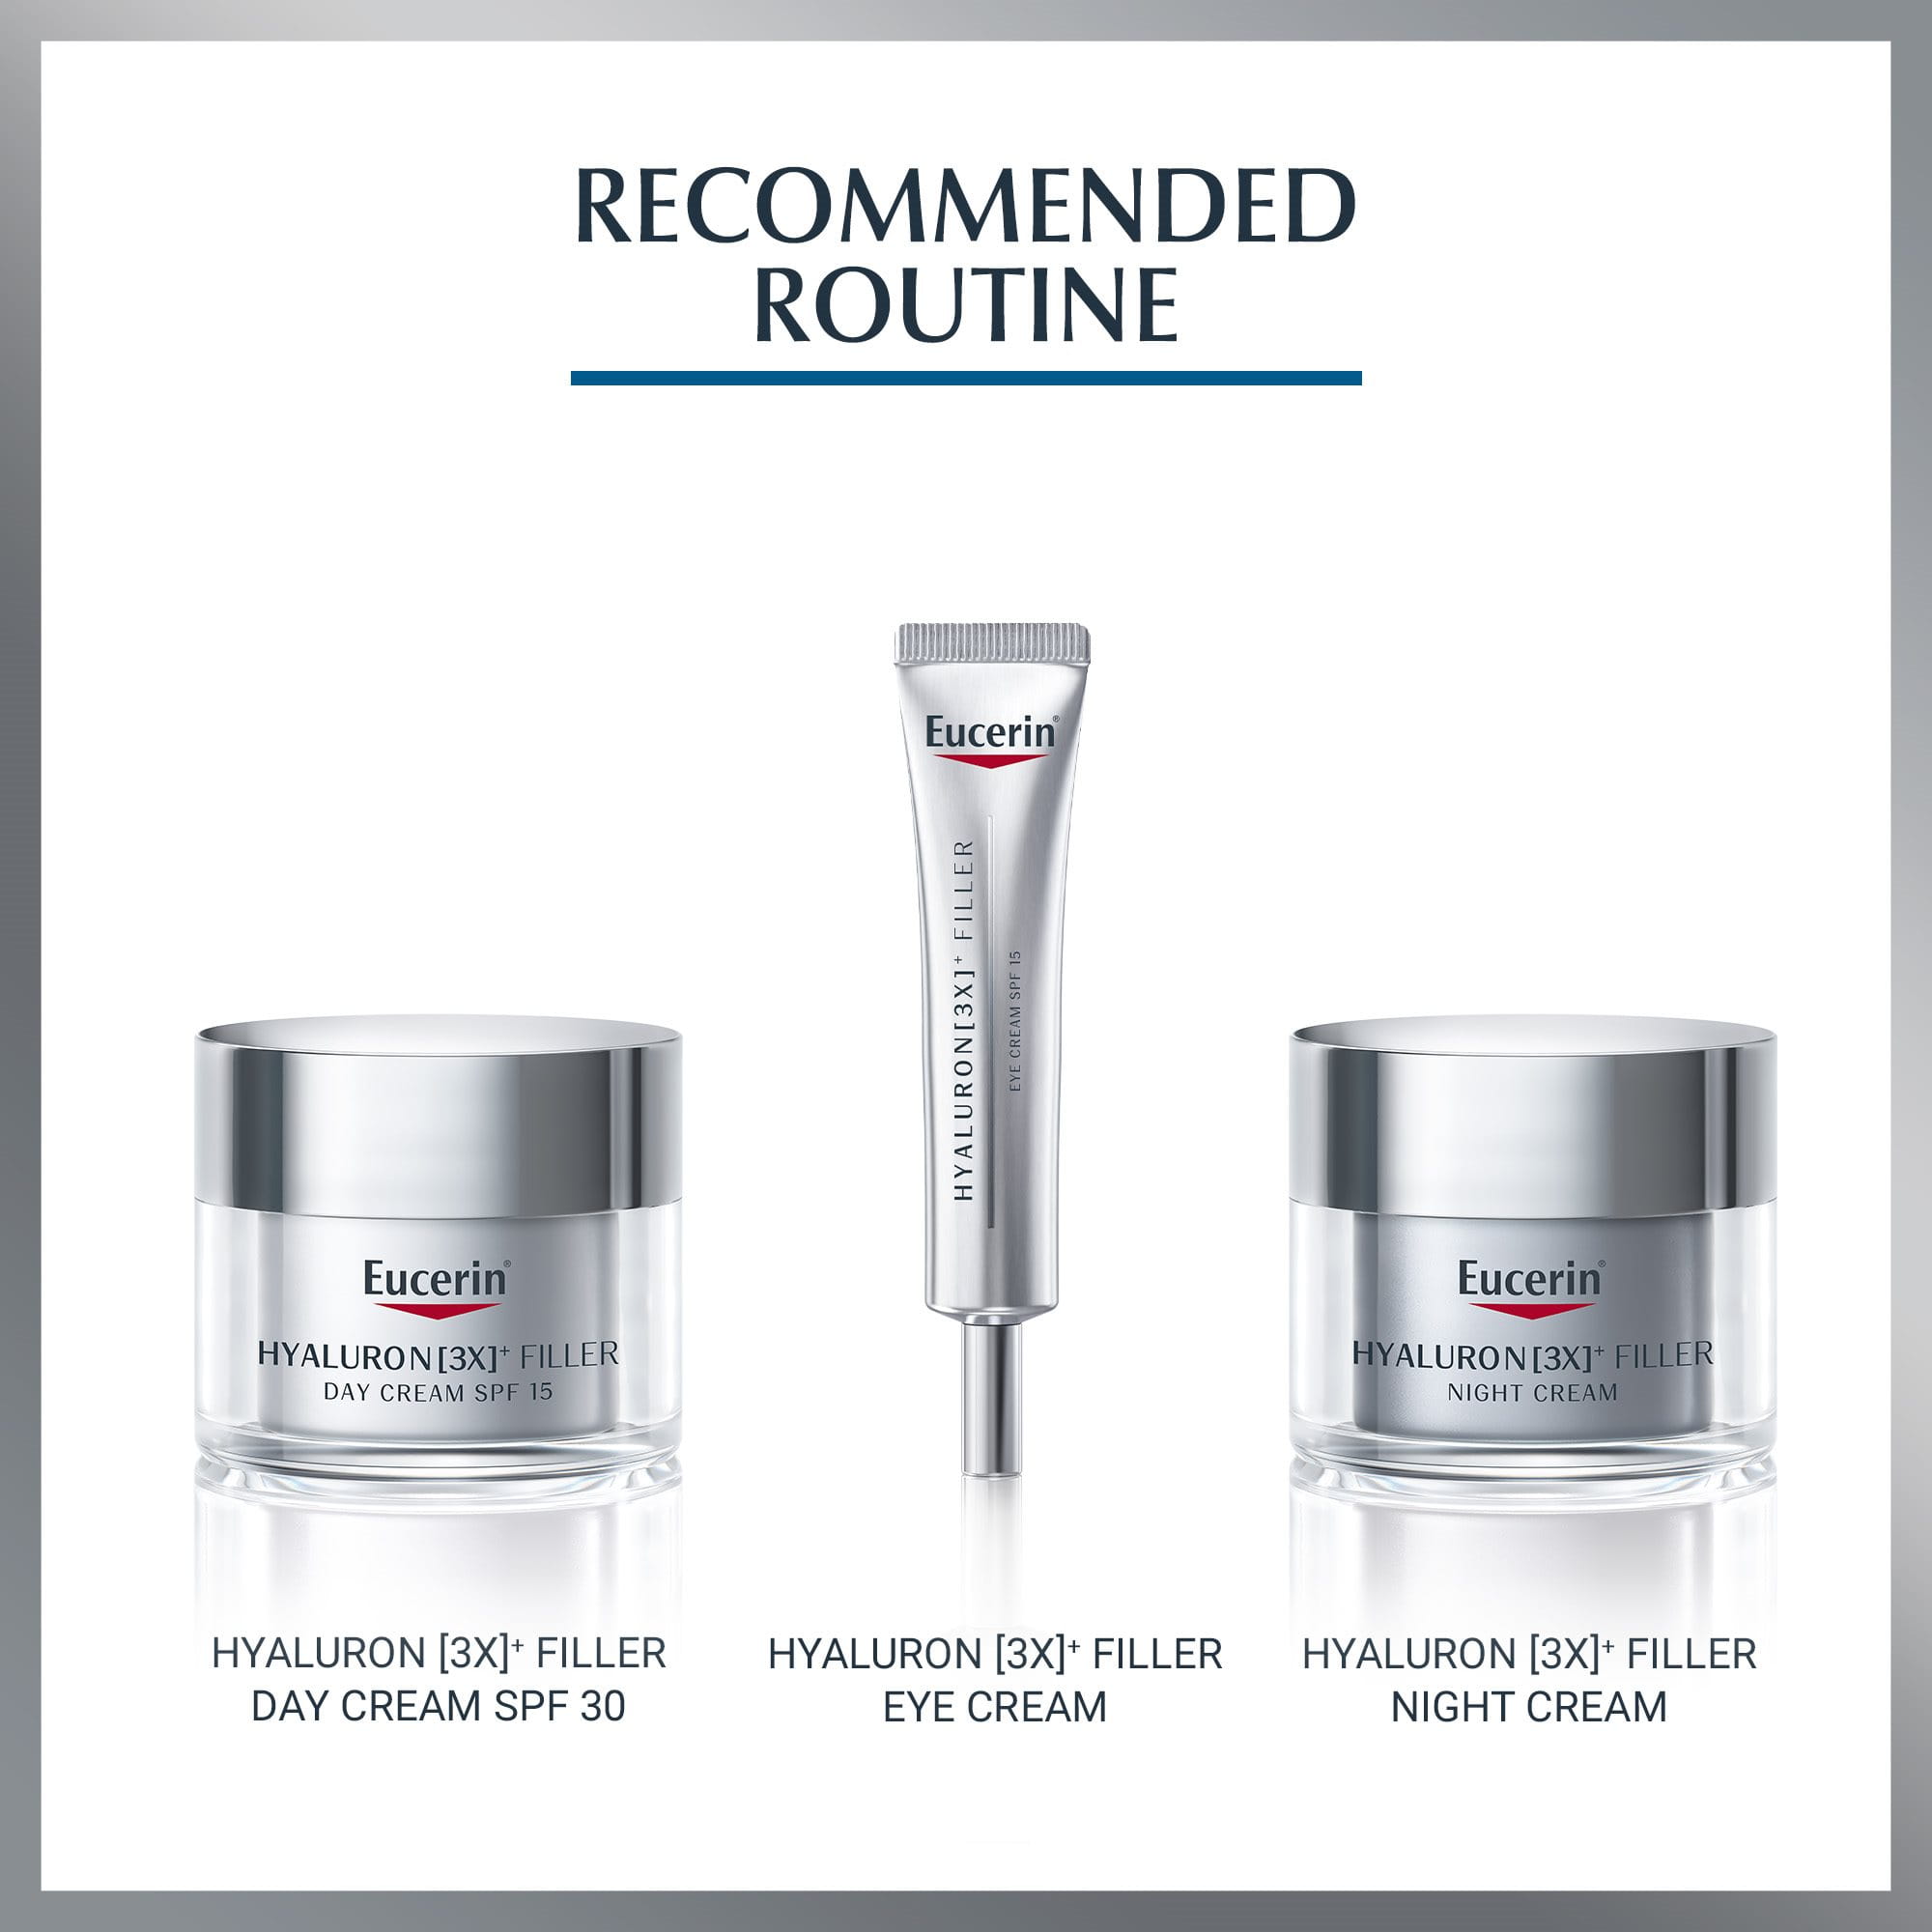 hyaluron filler concentrate recommended routine